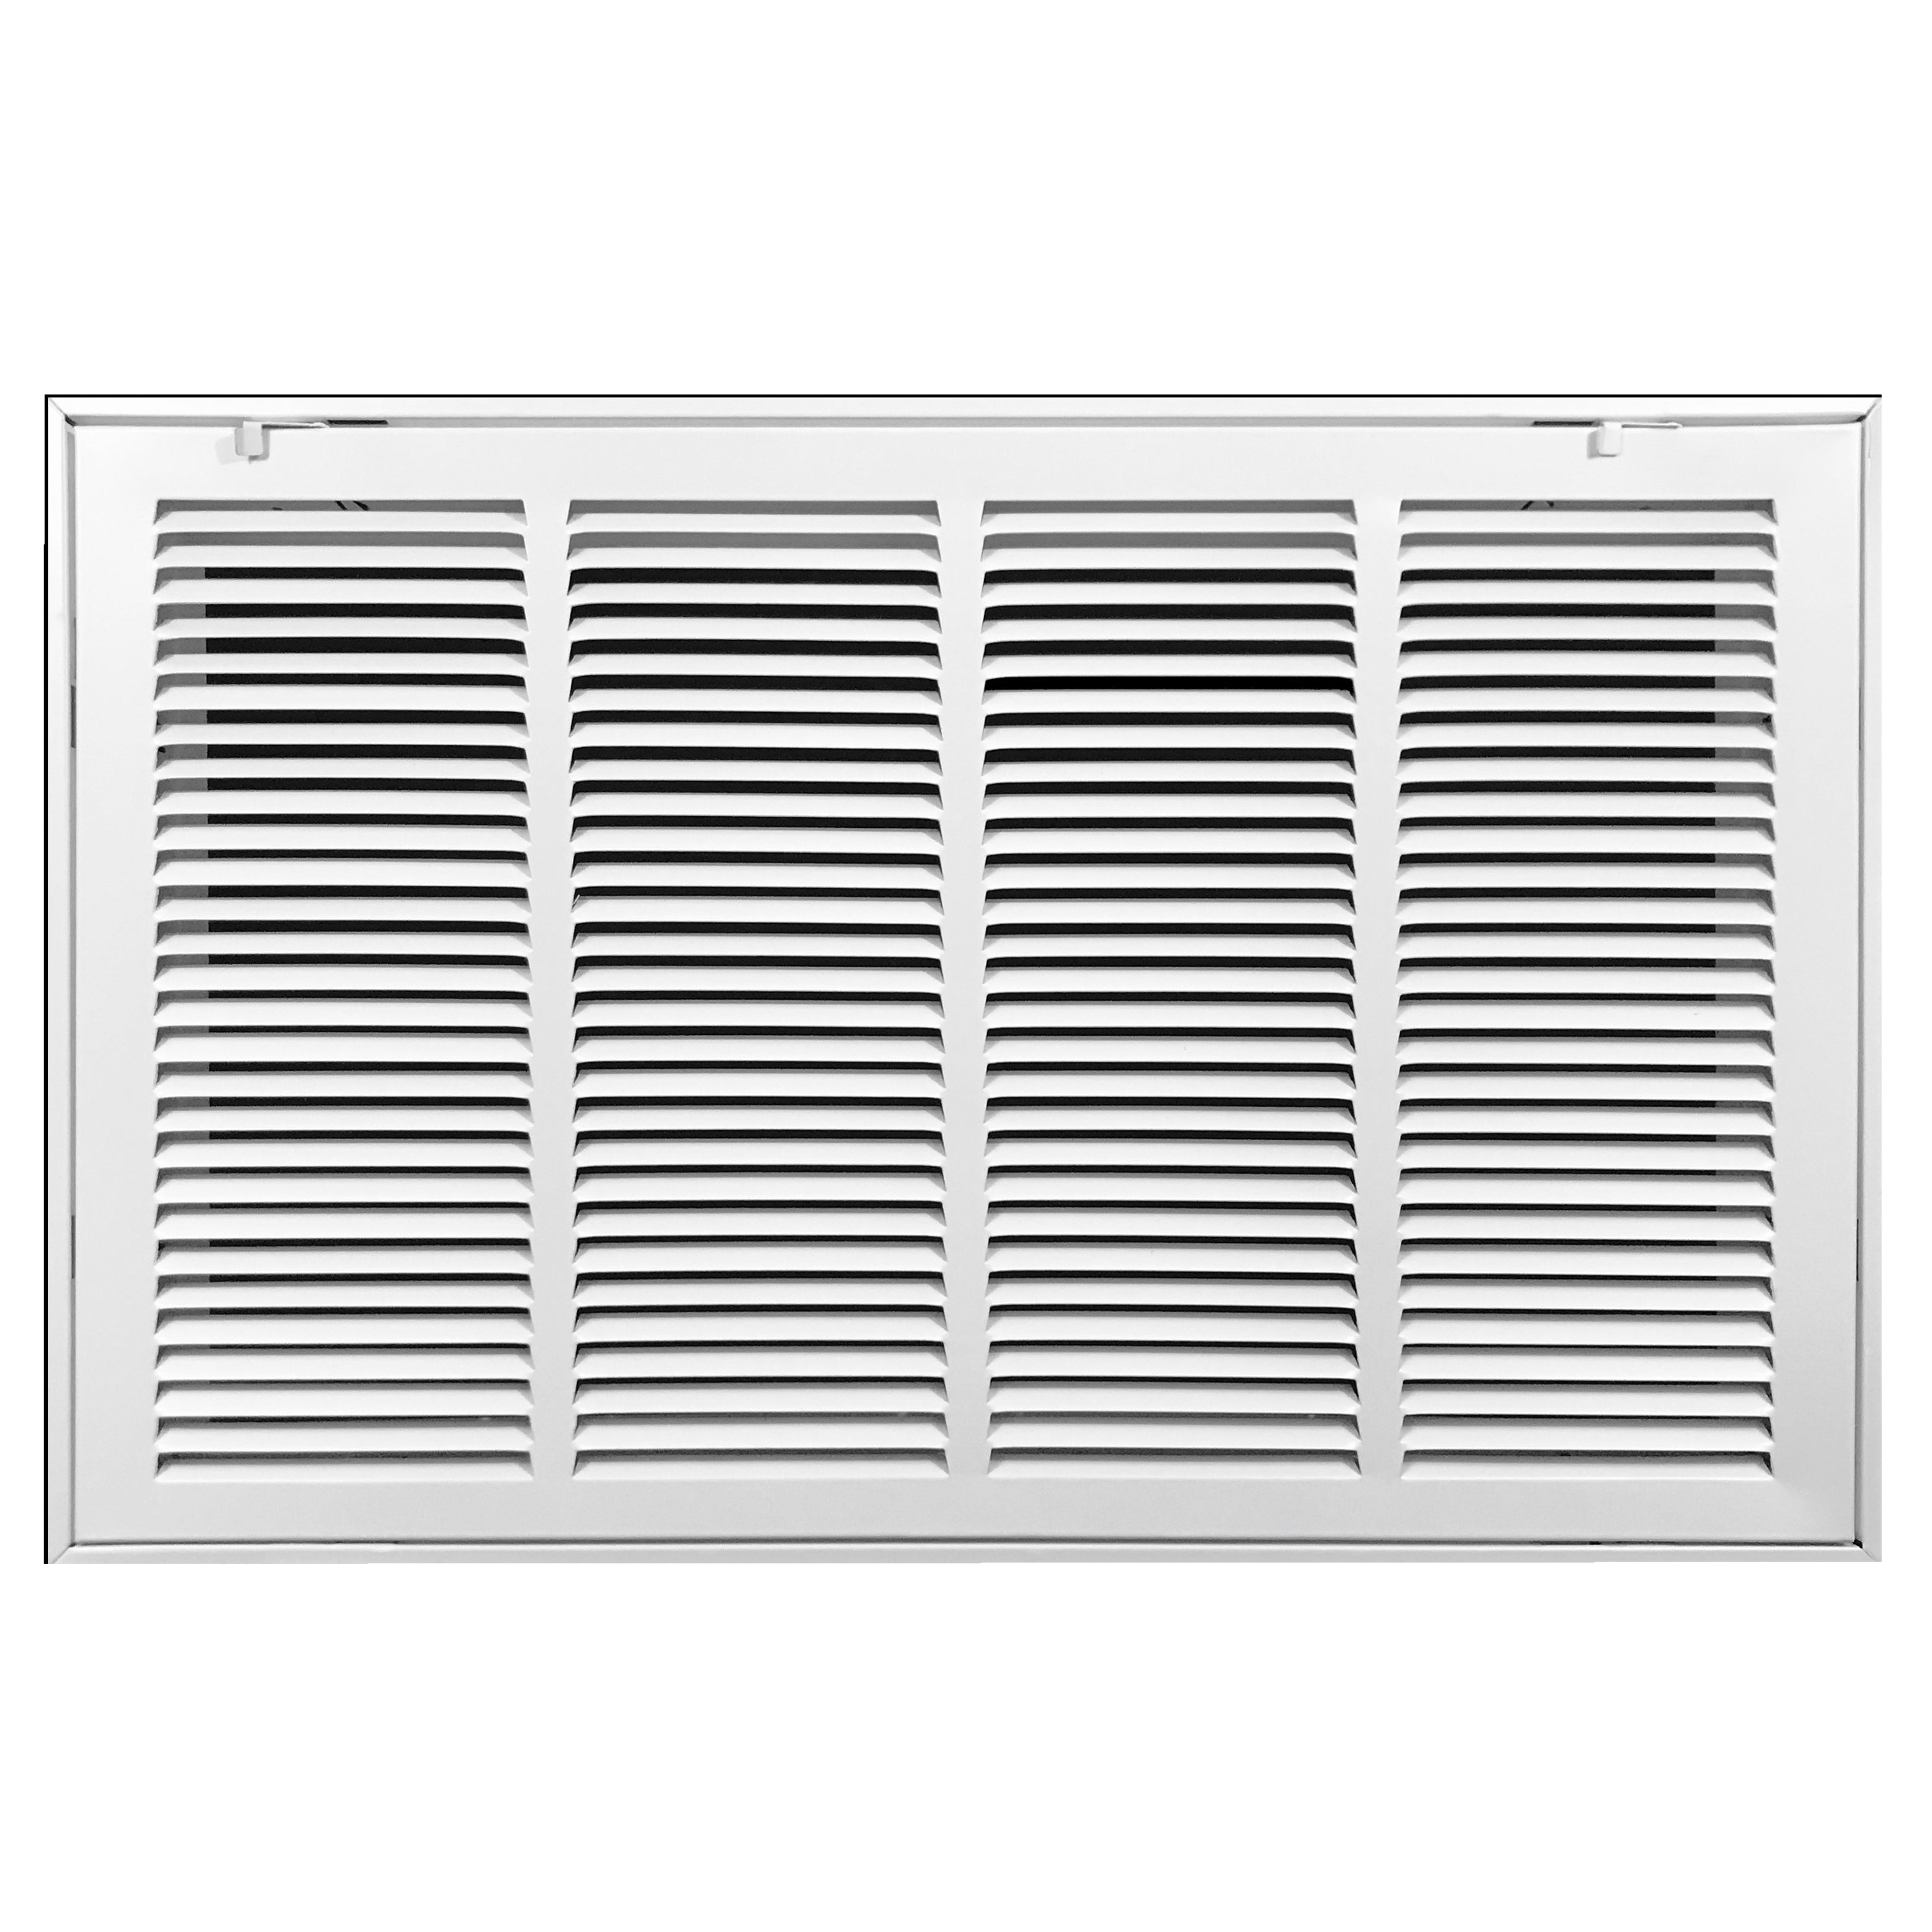 airgrilles 20" x 12" duct opening   steel return air filter grille for sidewall and ceiling hnd-rafg1-wh-20x12 752505979632 - 1